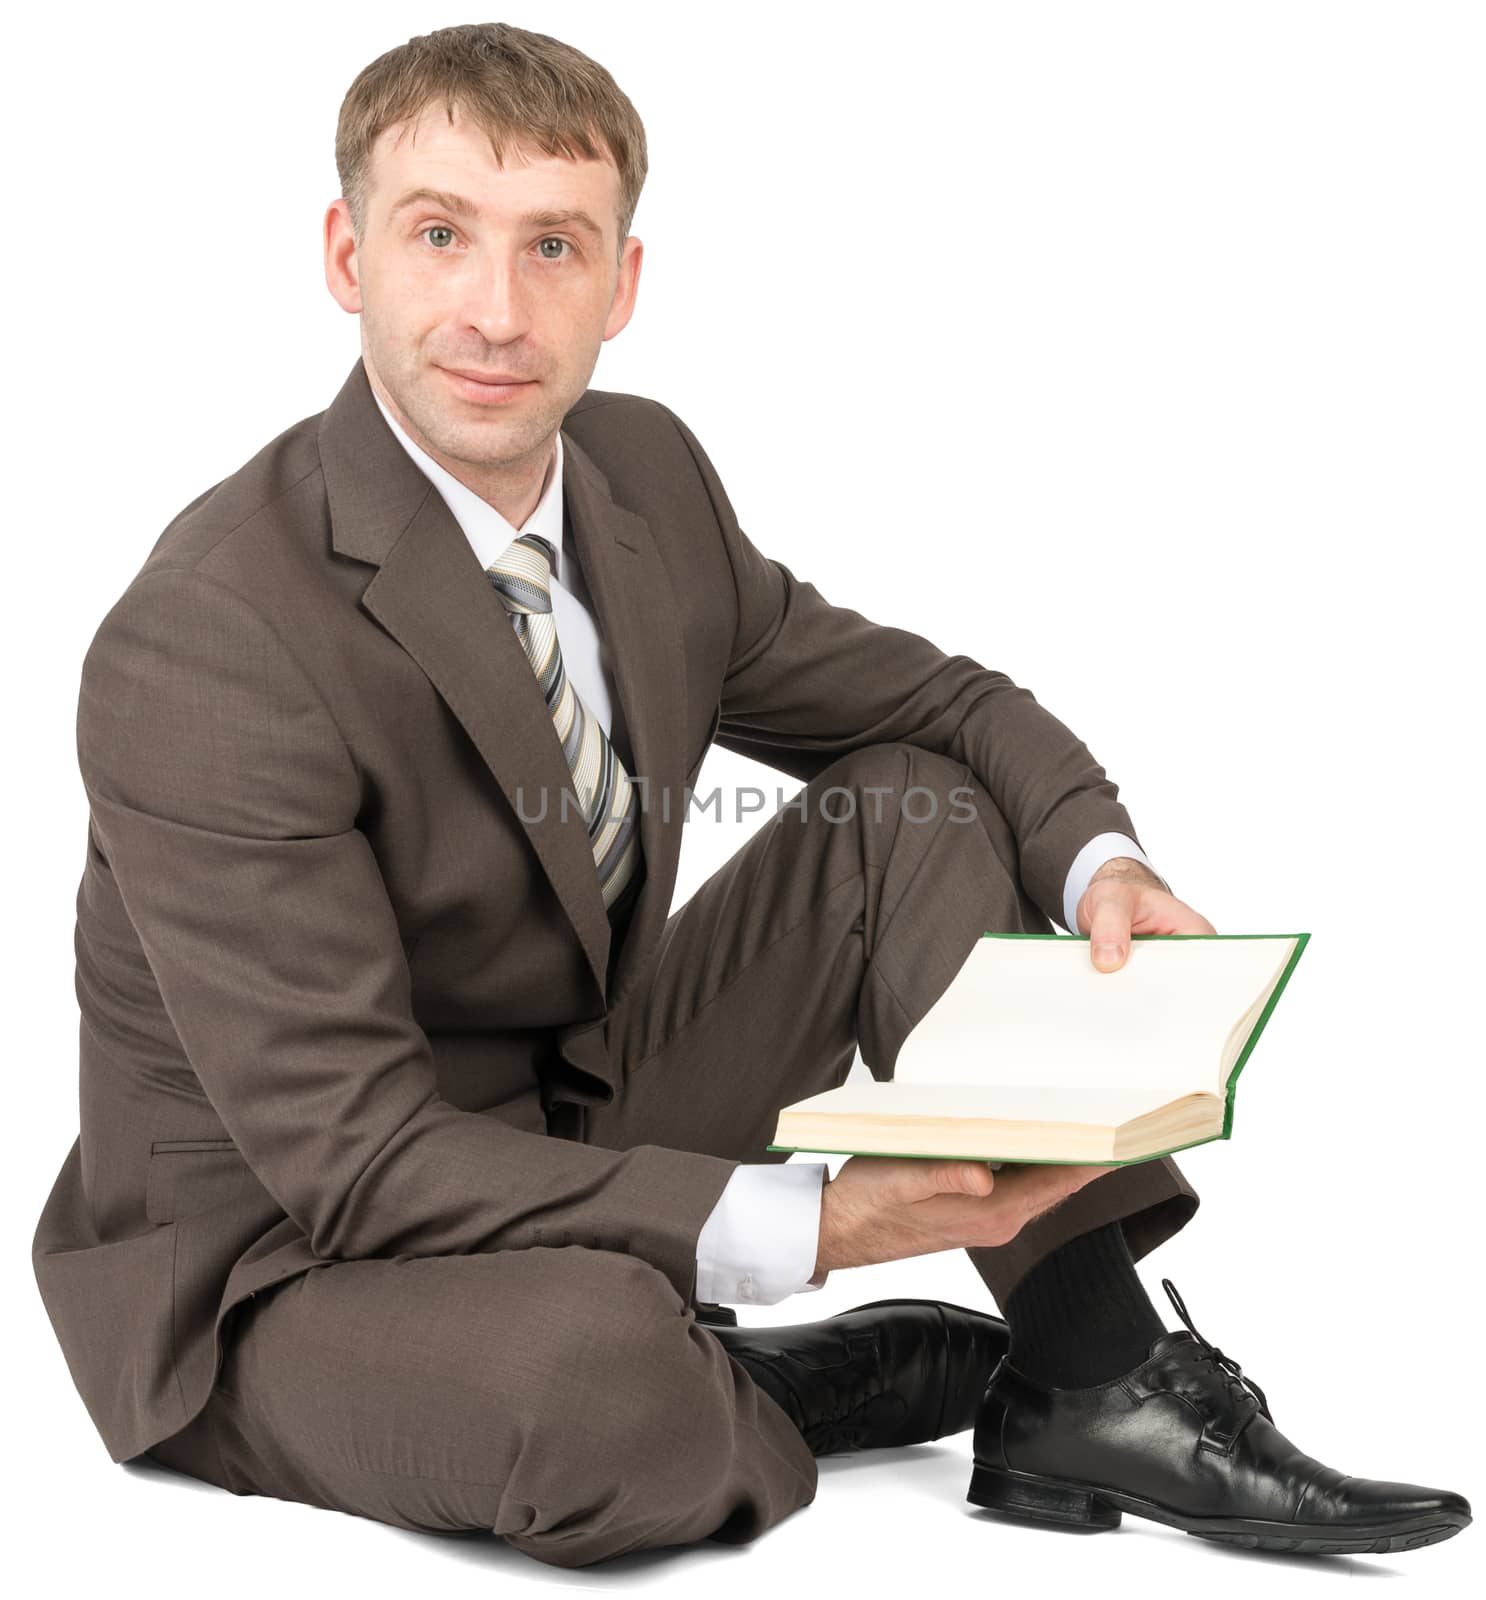 Man sitting with book isolated on white background